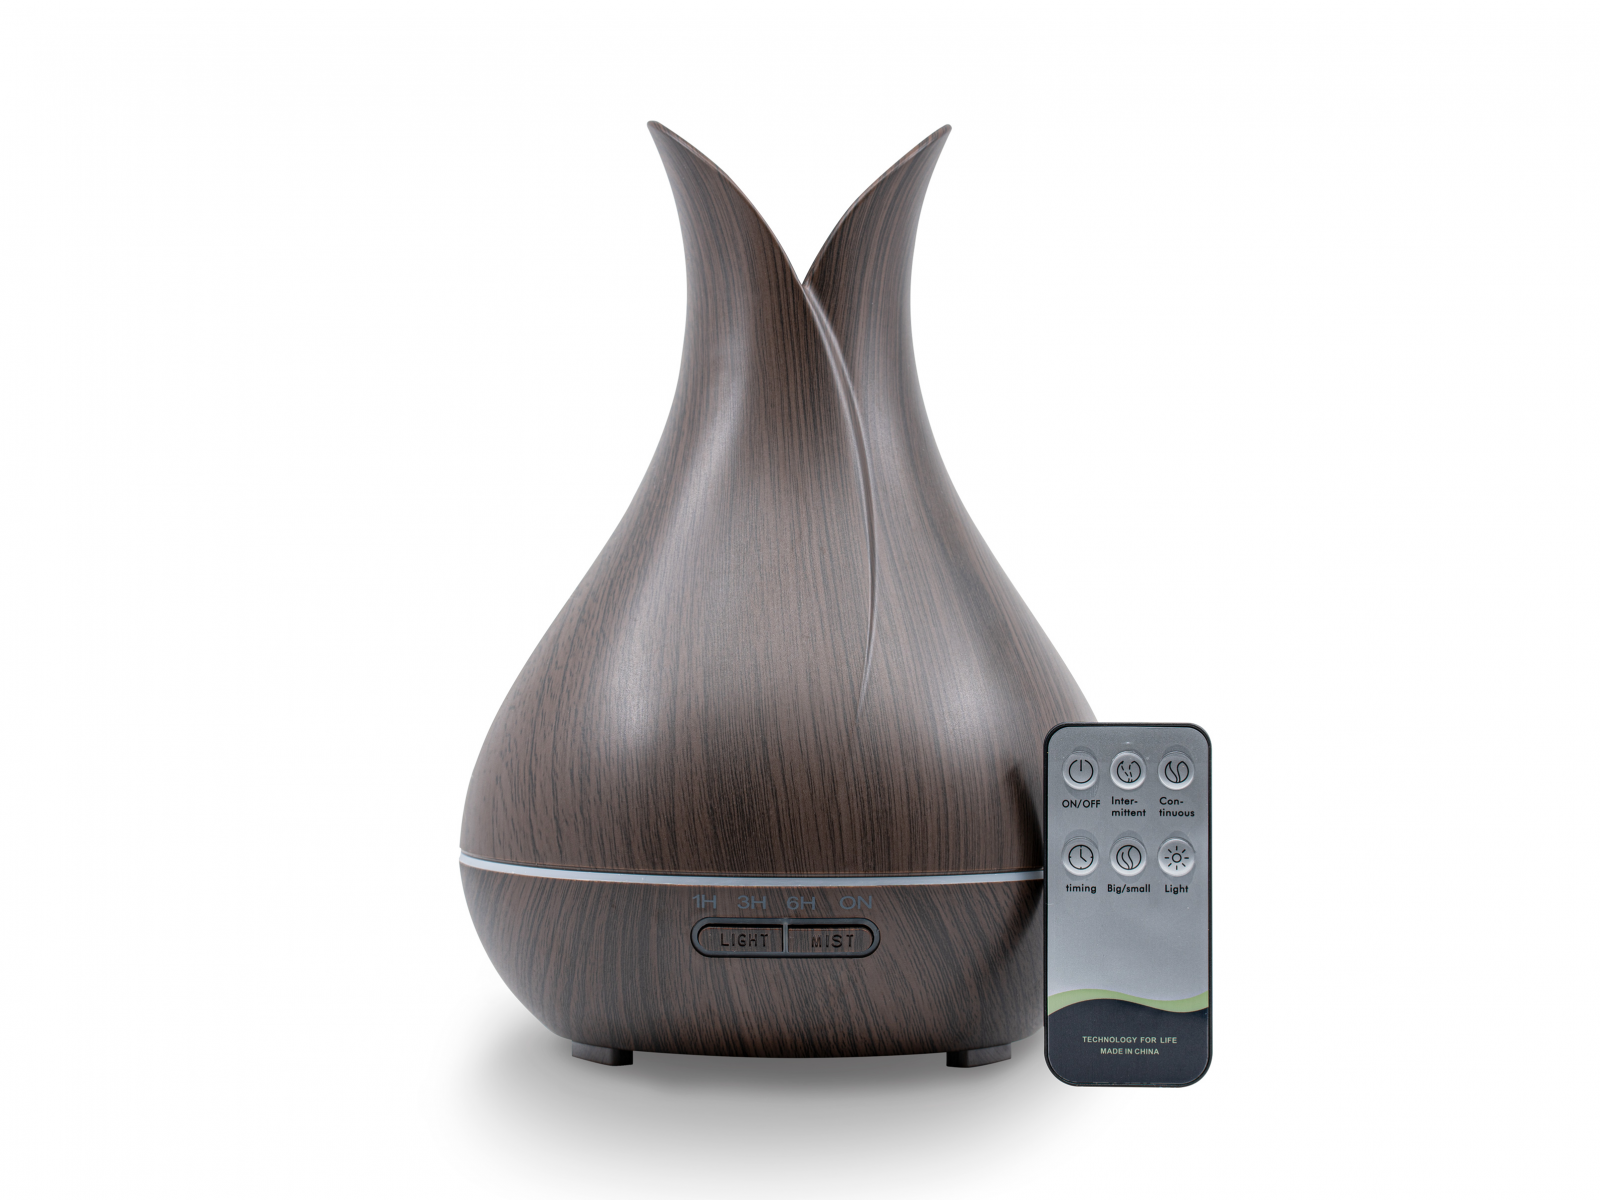 Aroma diffuser CARAFE 400 RC, dark wood, with remote control